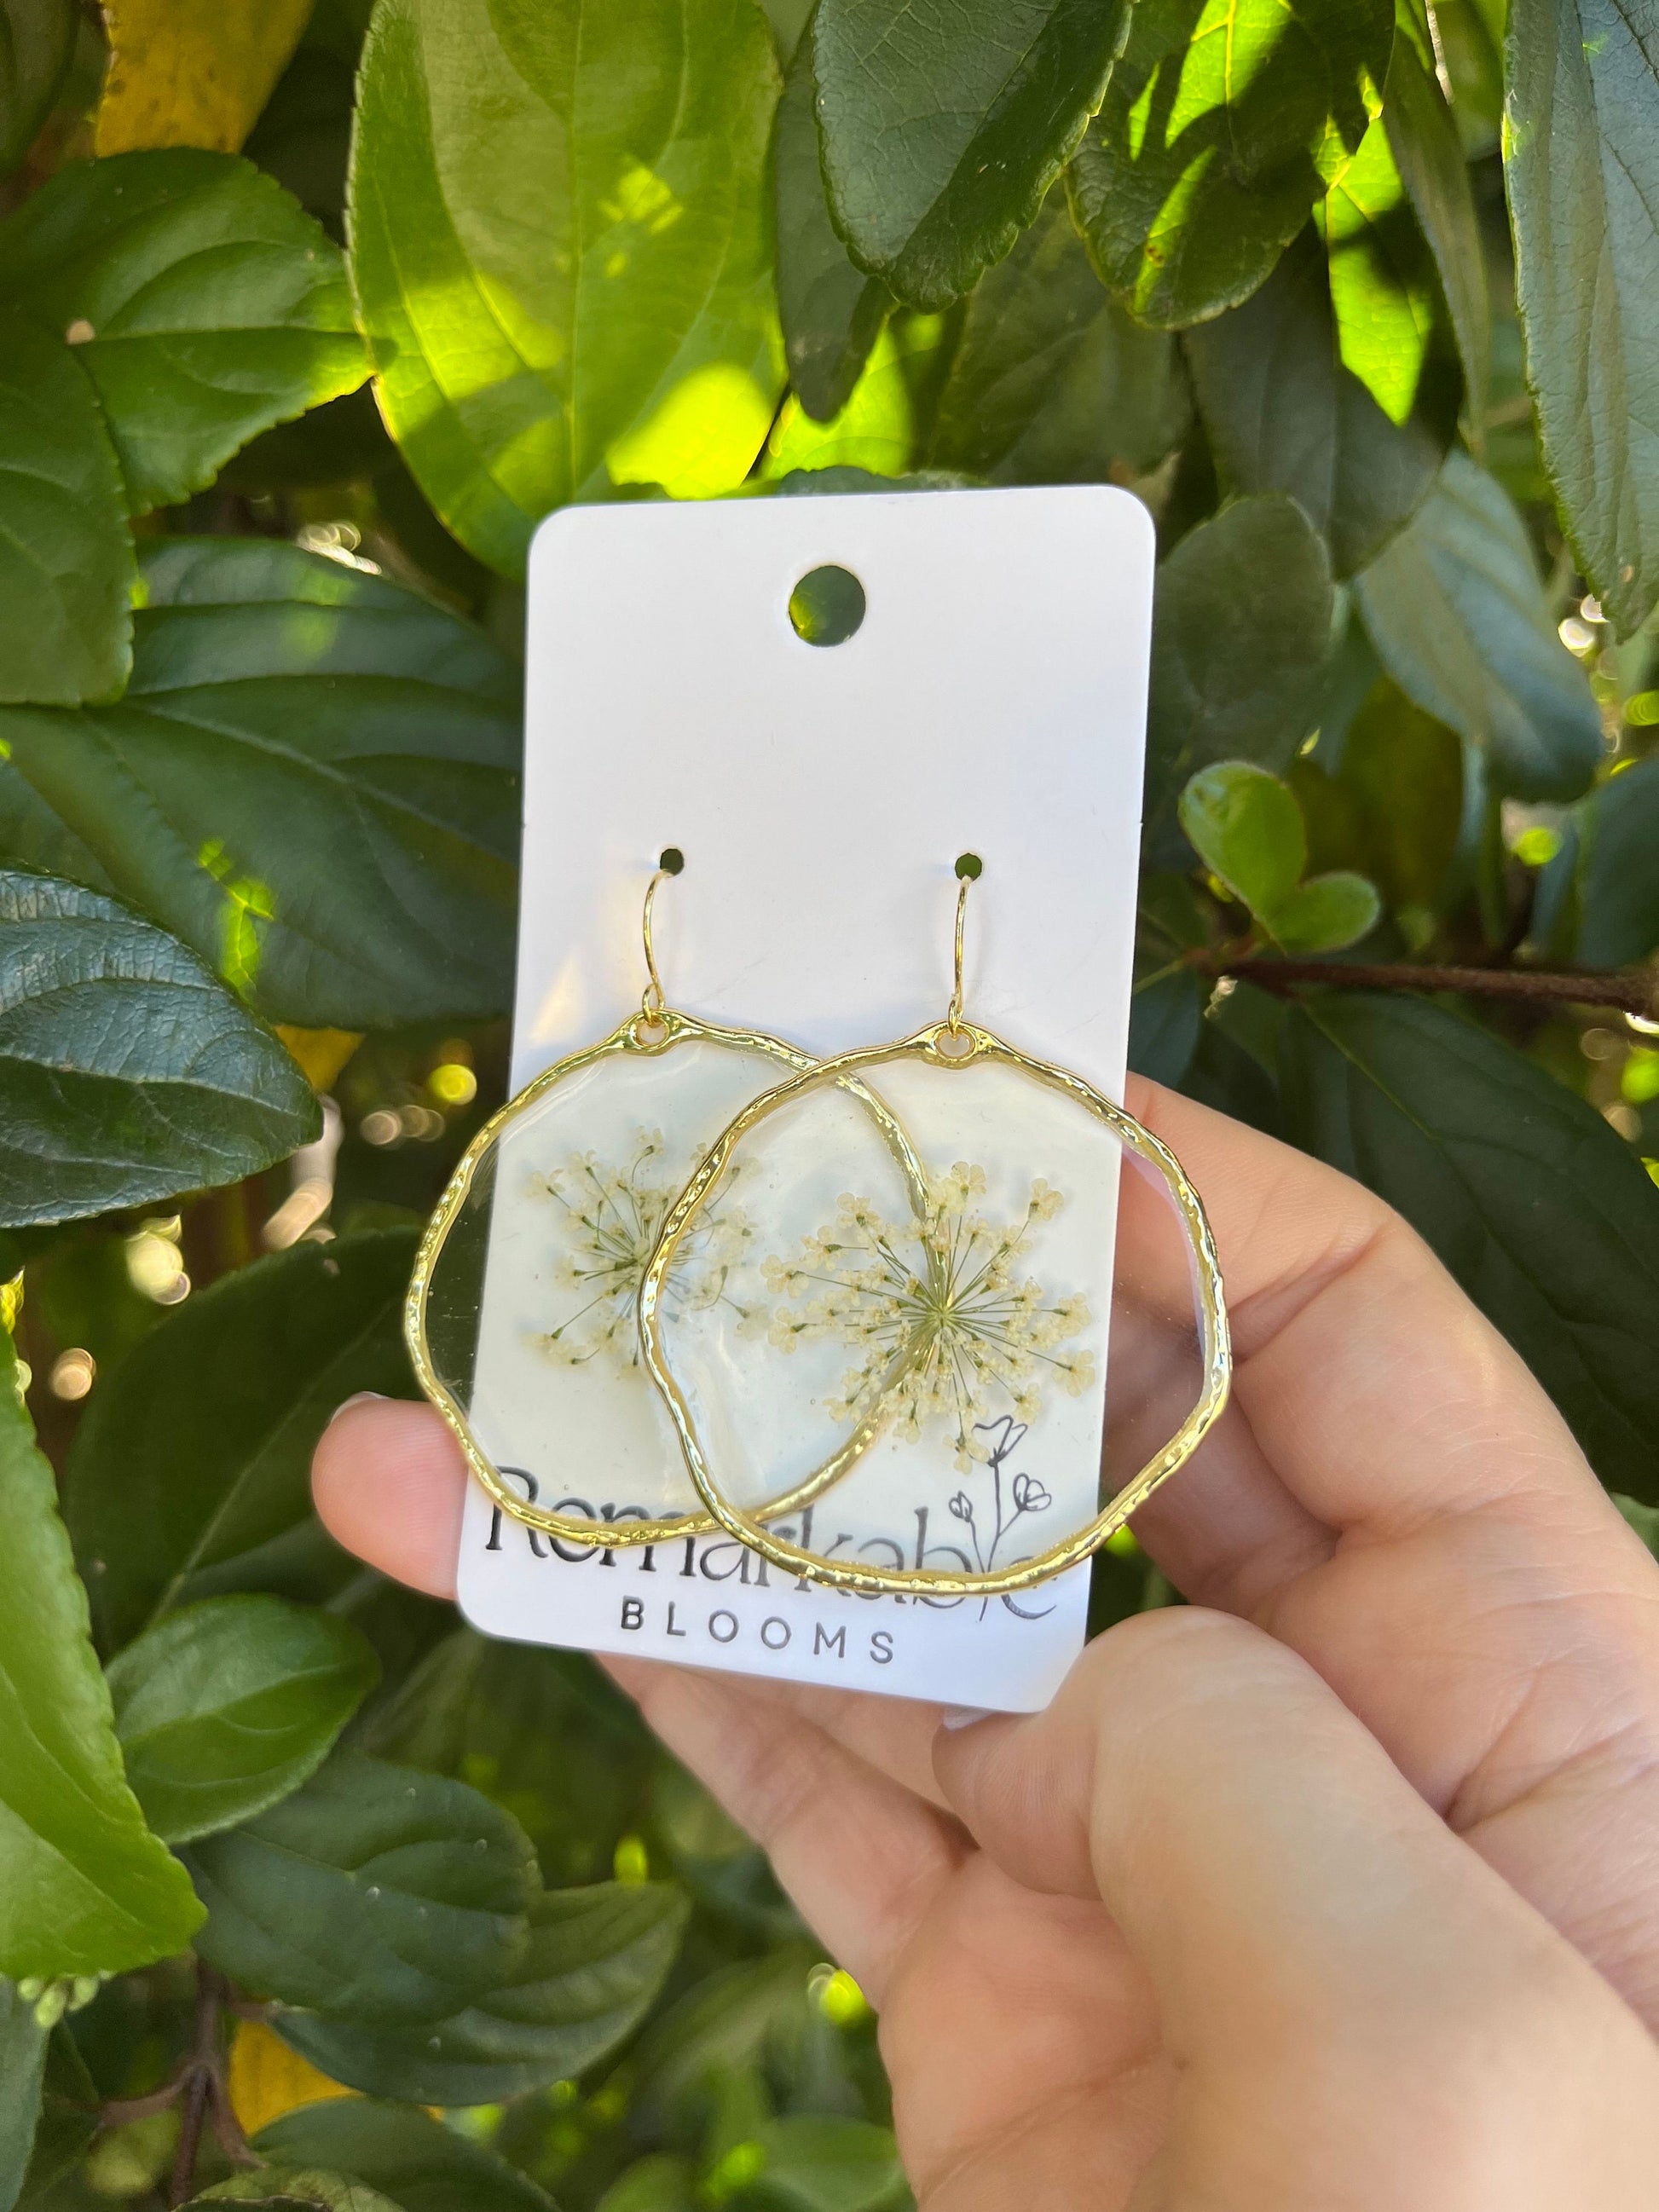 Handmade minimalist Earrings. Made with pressed Queen Anne’s Lace flowers. Hypoallergenic Earrings. 14K gold Plated.